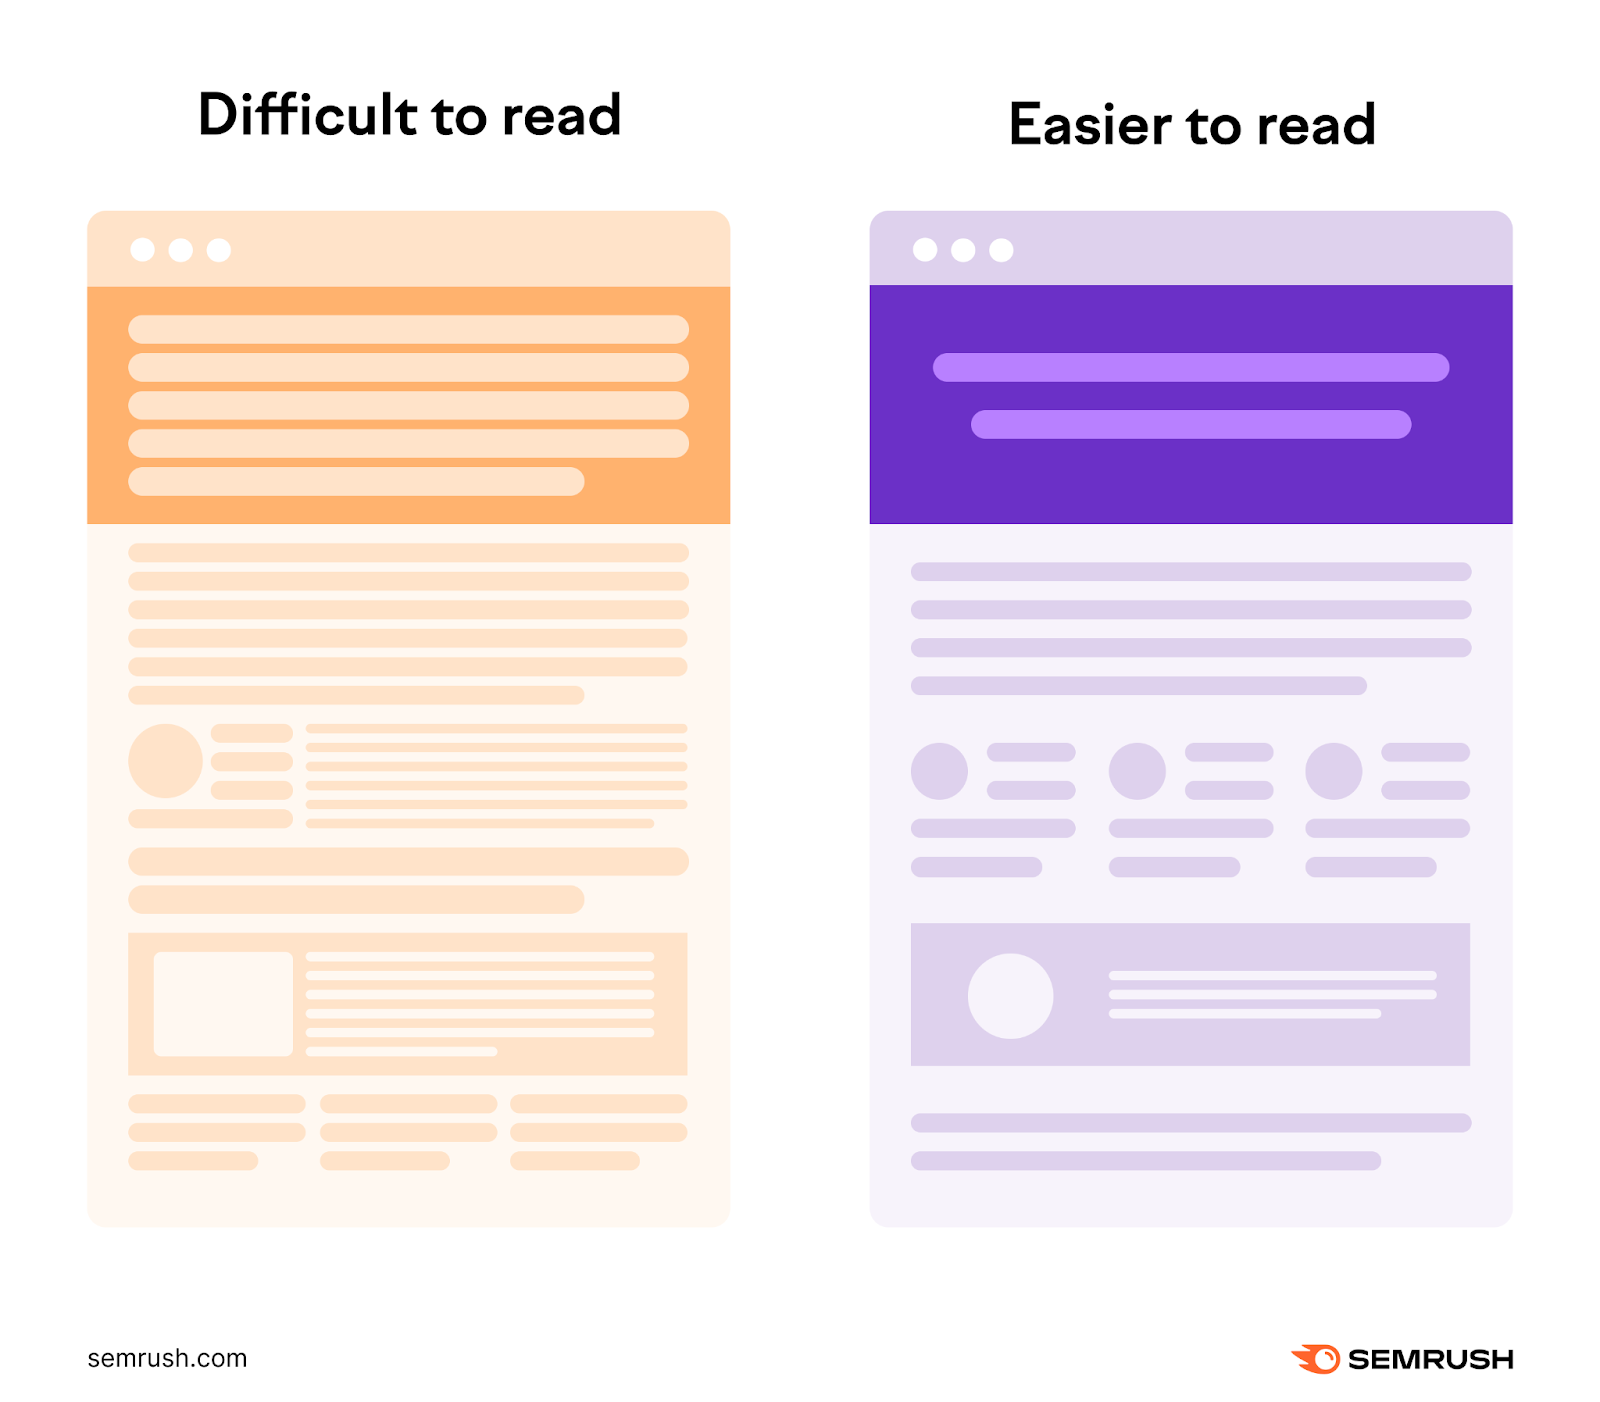 A visual showing difficult to read vs easier to read content formats